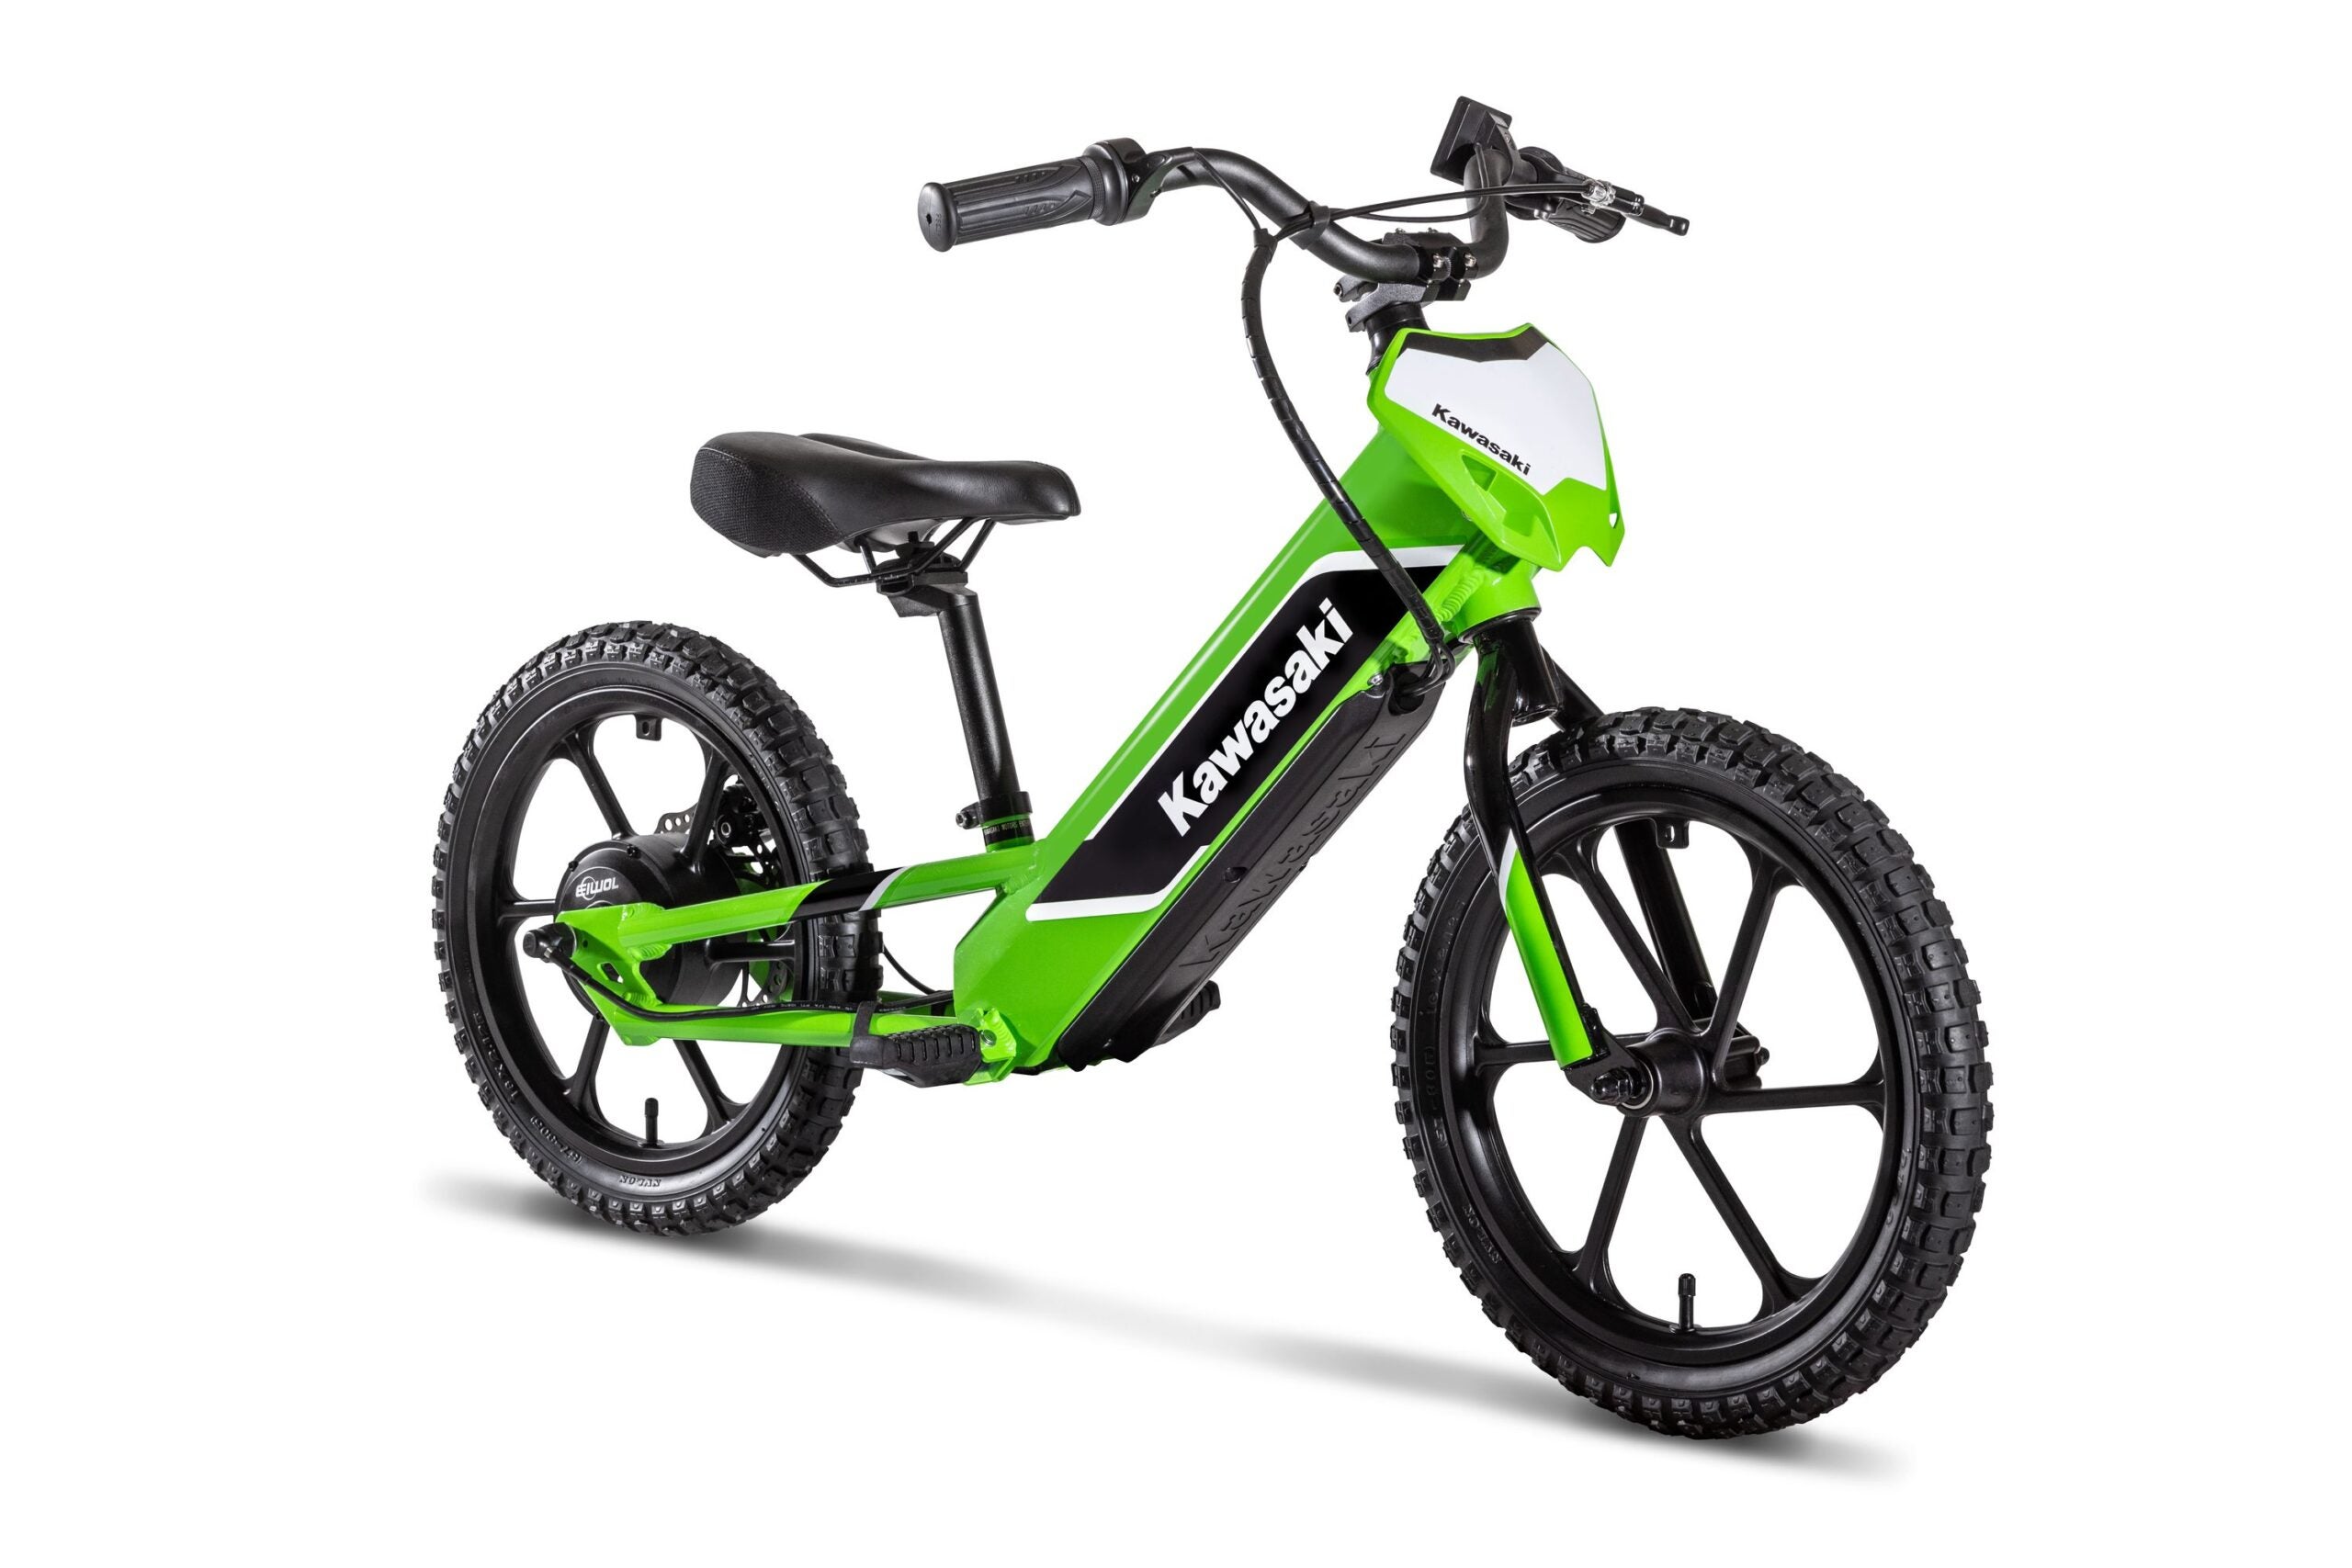 Kawasaki’s Elektrode Is the Perfect Gift for Young Motorcyclists